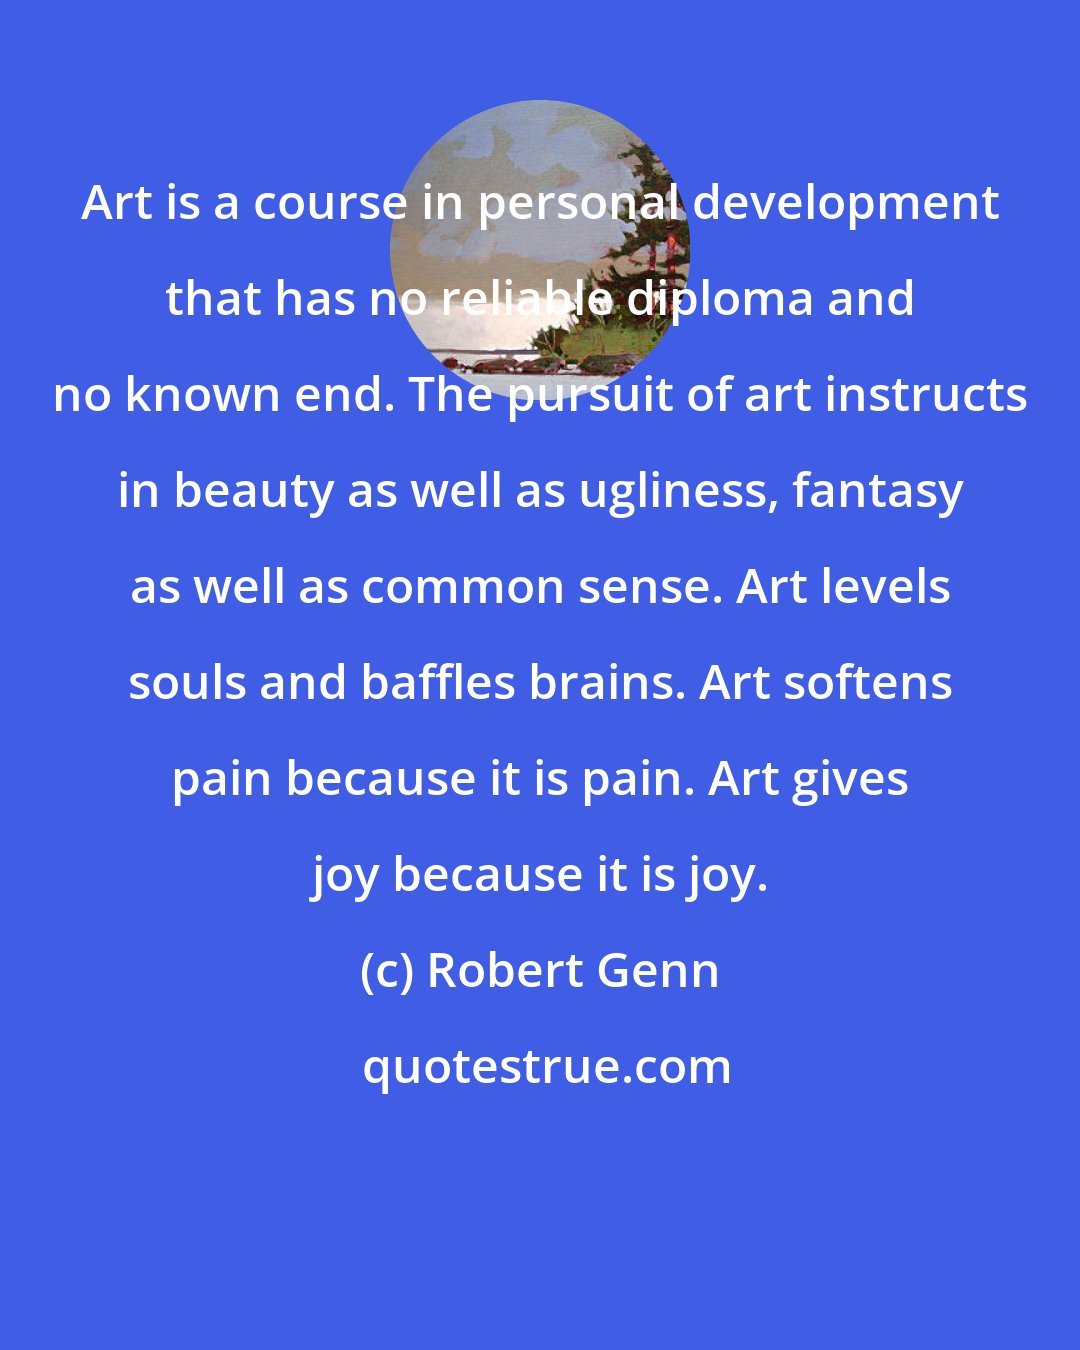 Robert Genn: Art is a course in personal development that has no reliable diploma and no known end. The pursuit of art instructs in beauty as well as ugliness, fantasy as well as common sense. Art levels souls and baffles brains. Art softens pain because it is pain. Art gives joy because it is joy.